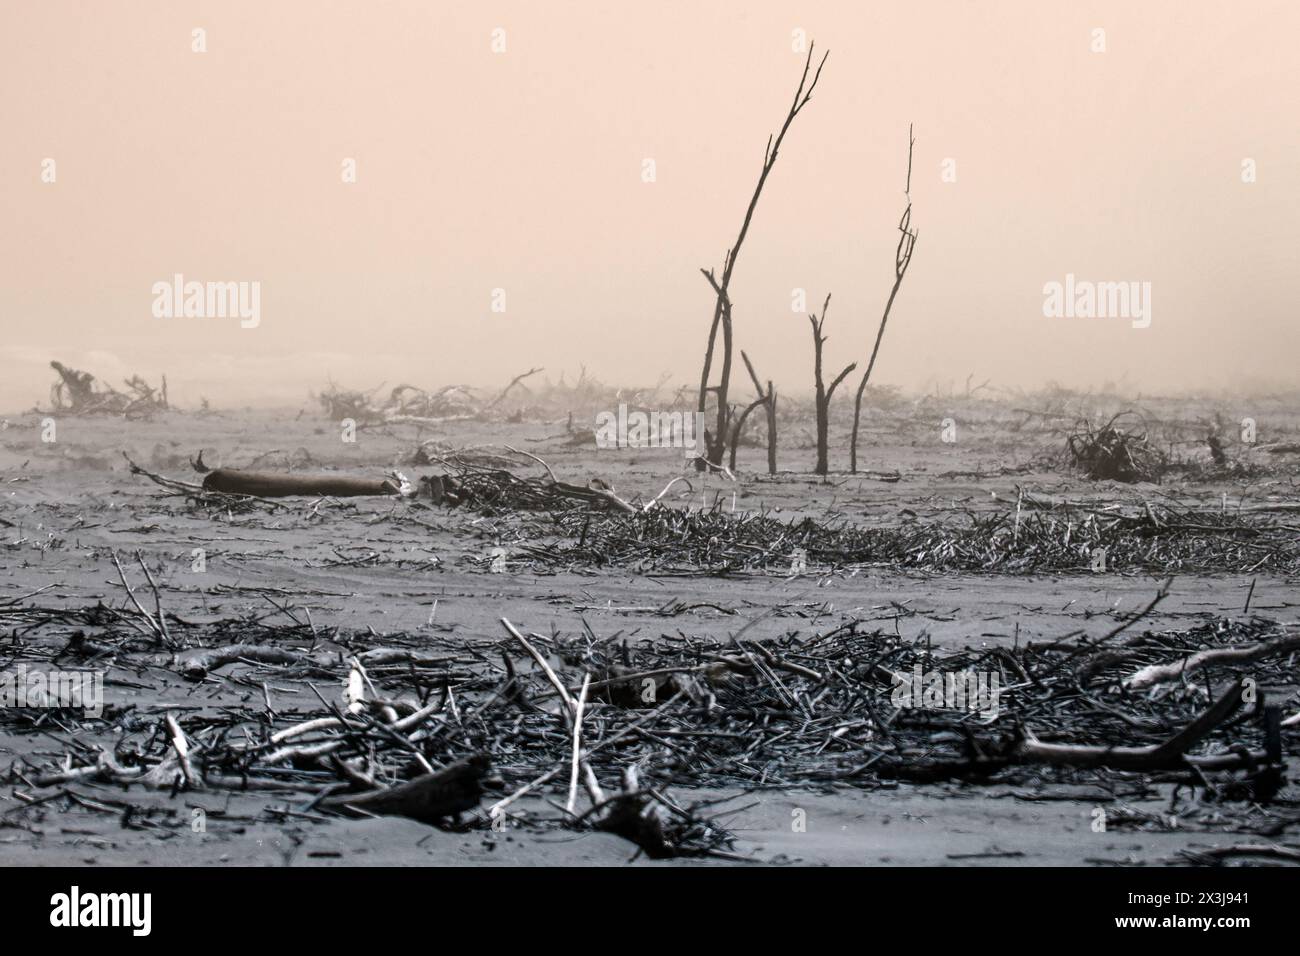 A disturbing scene of desolation with driftwood, some upright, brought down by the Orange River and deposited on the beach, showing through the mist. Stock Photo